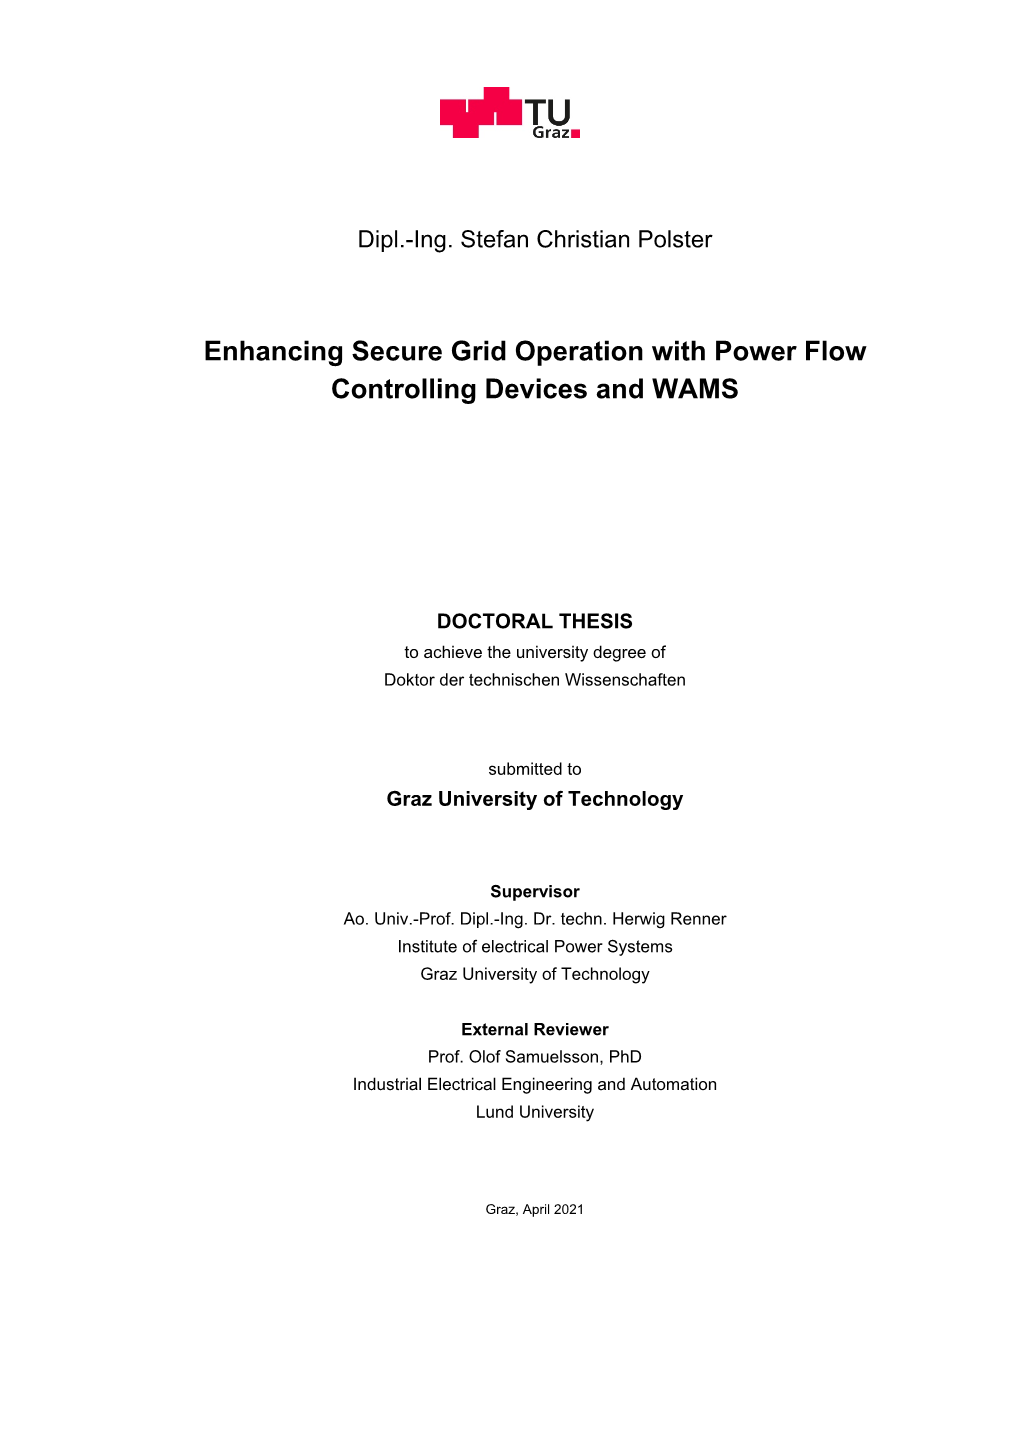 Enhancing Secure Grid Operation with Power Flow Controlling Devices and WAMS